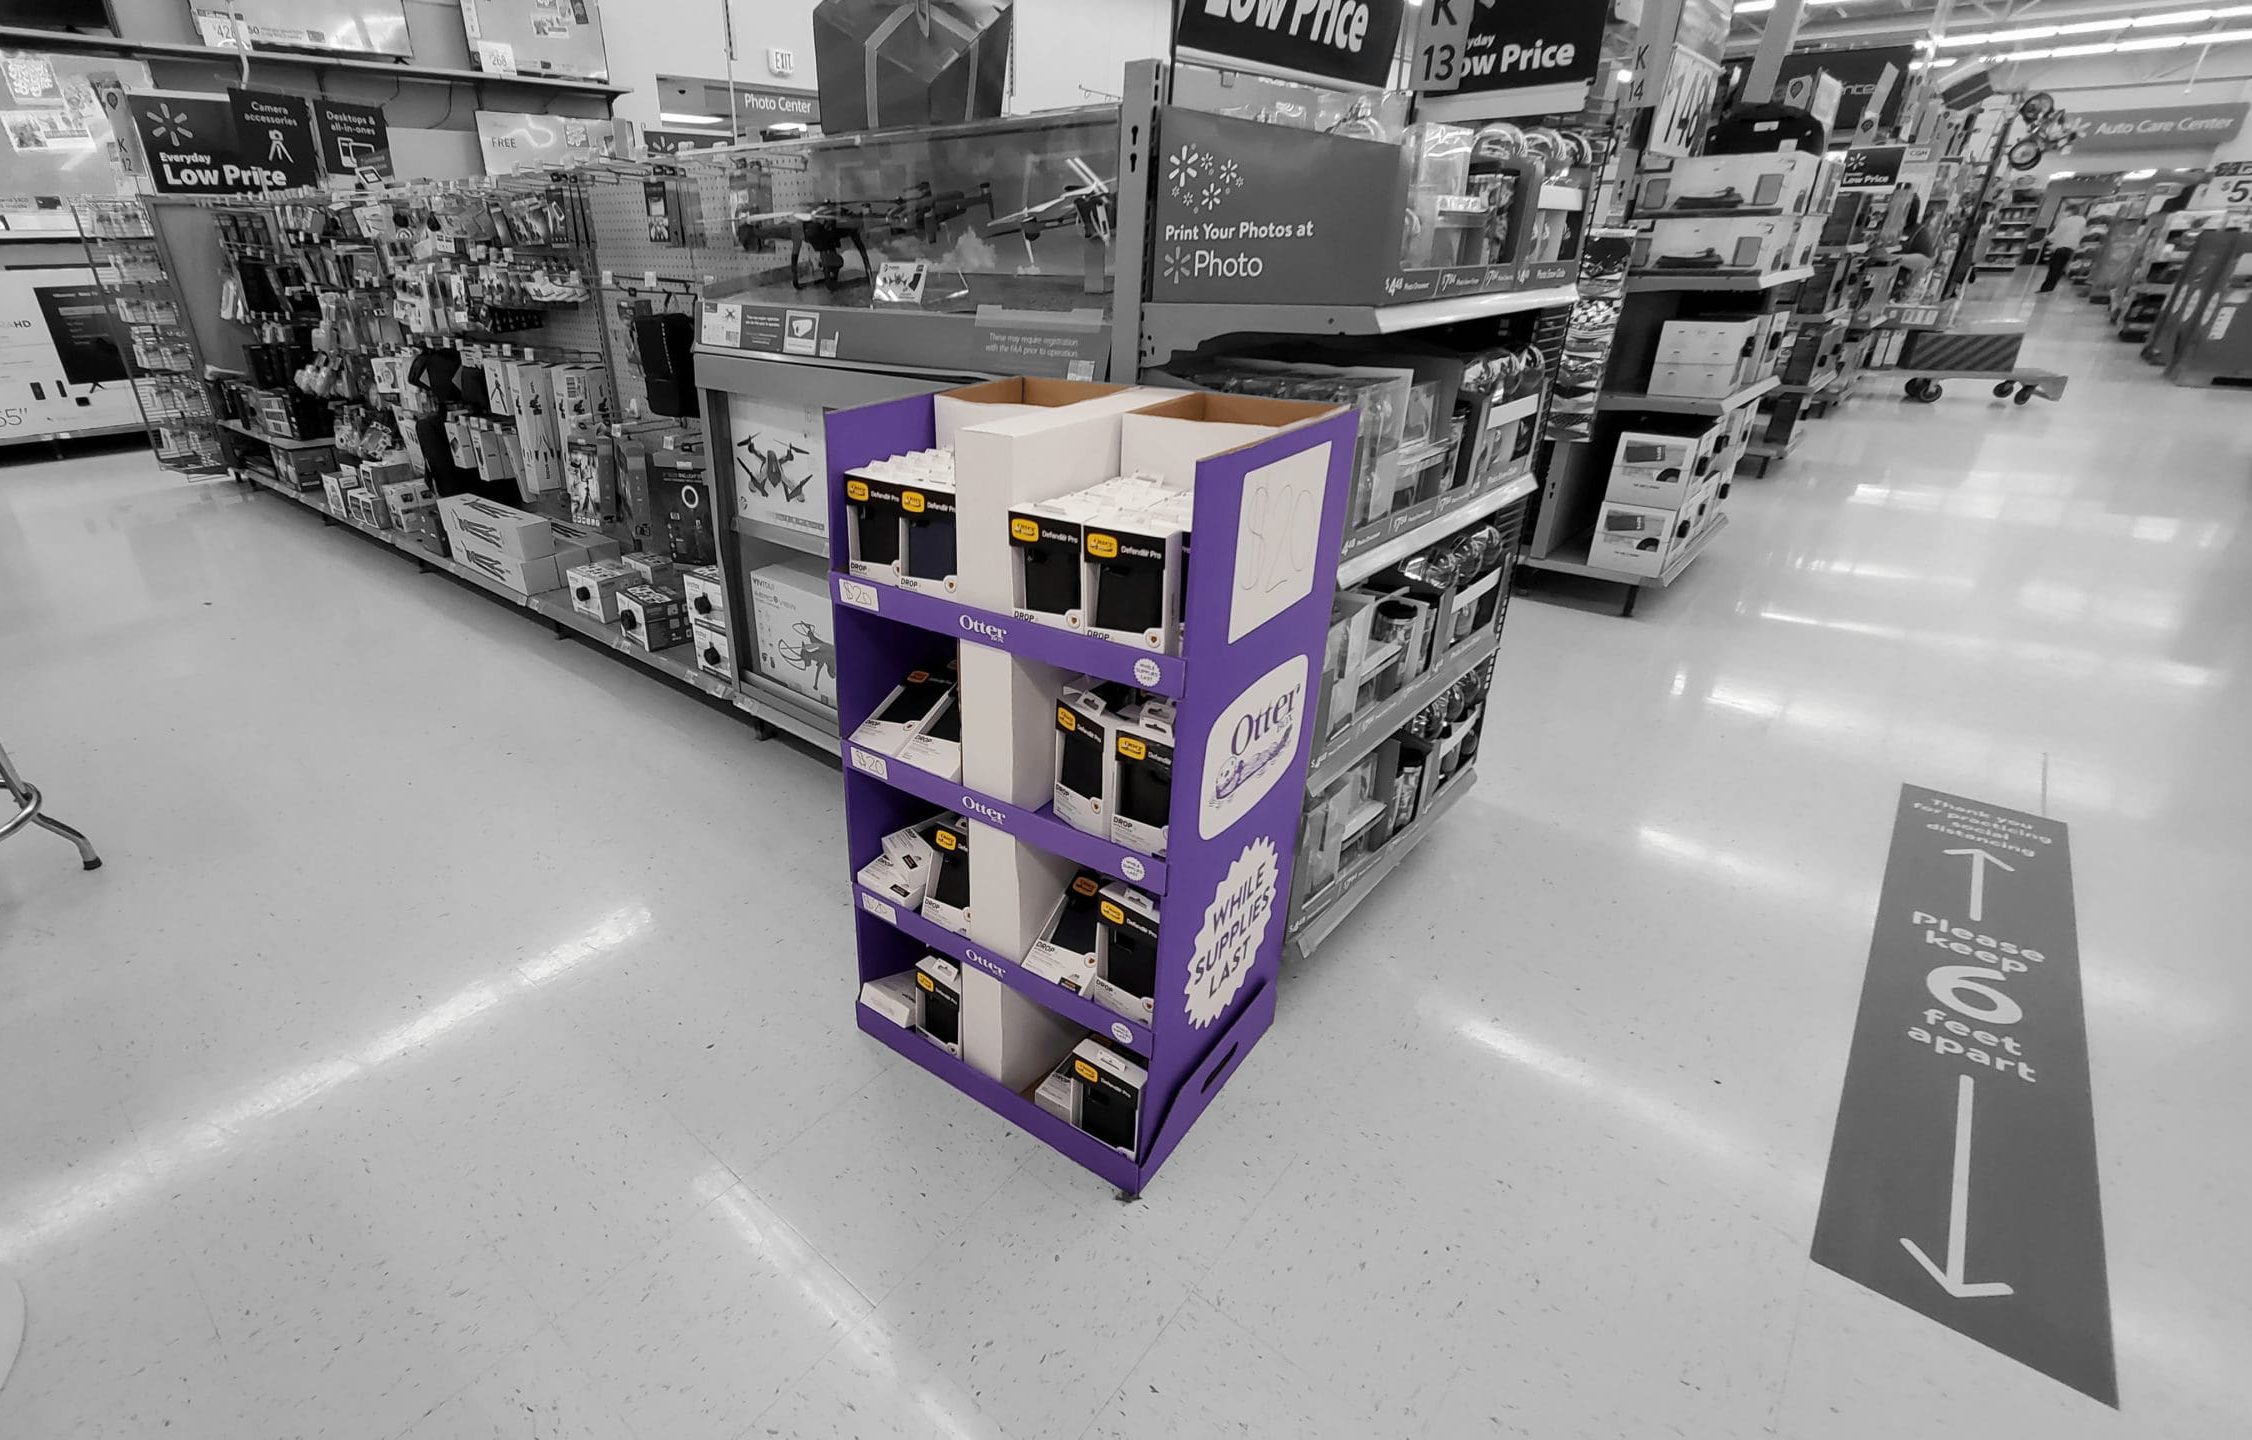 Otter Box product display in Walmart Electronics department